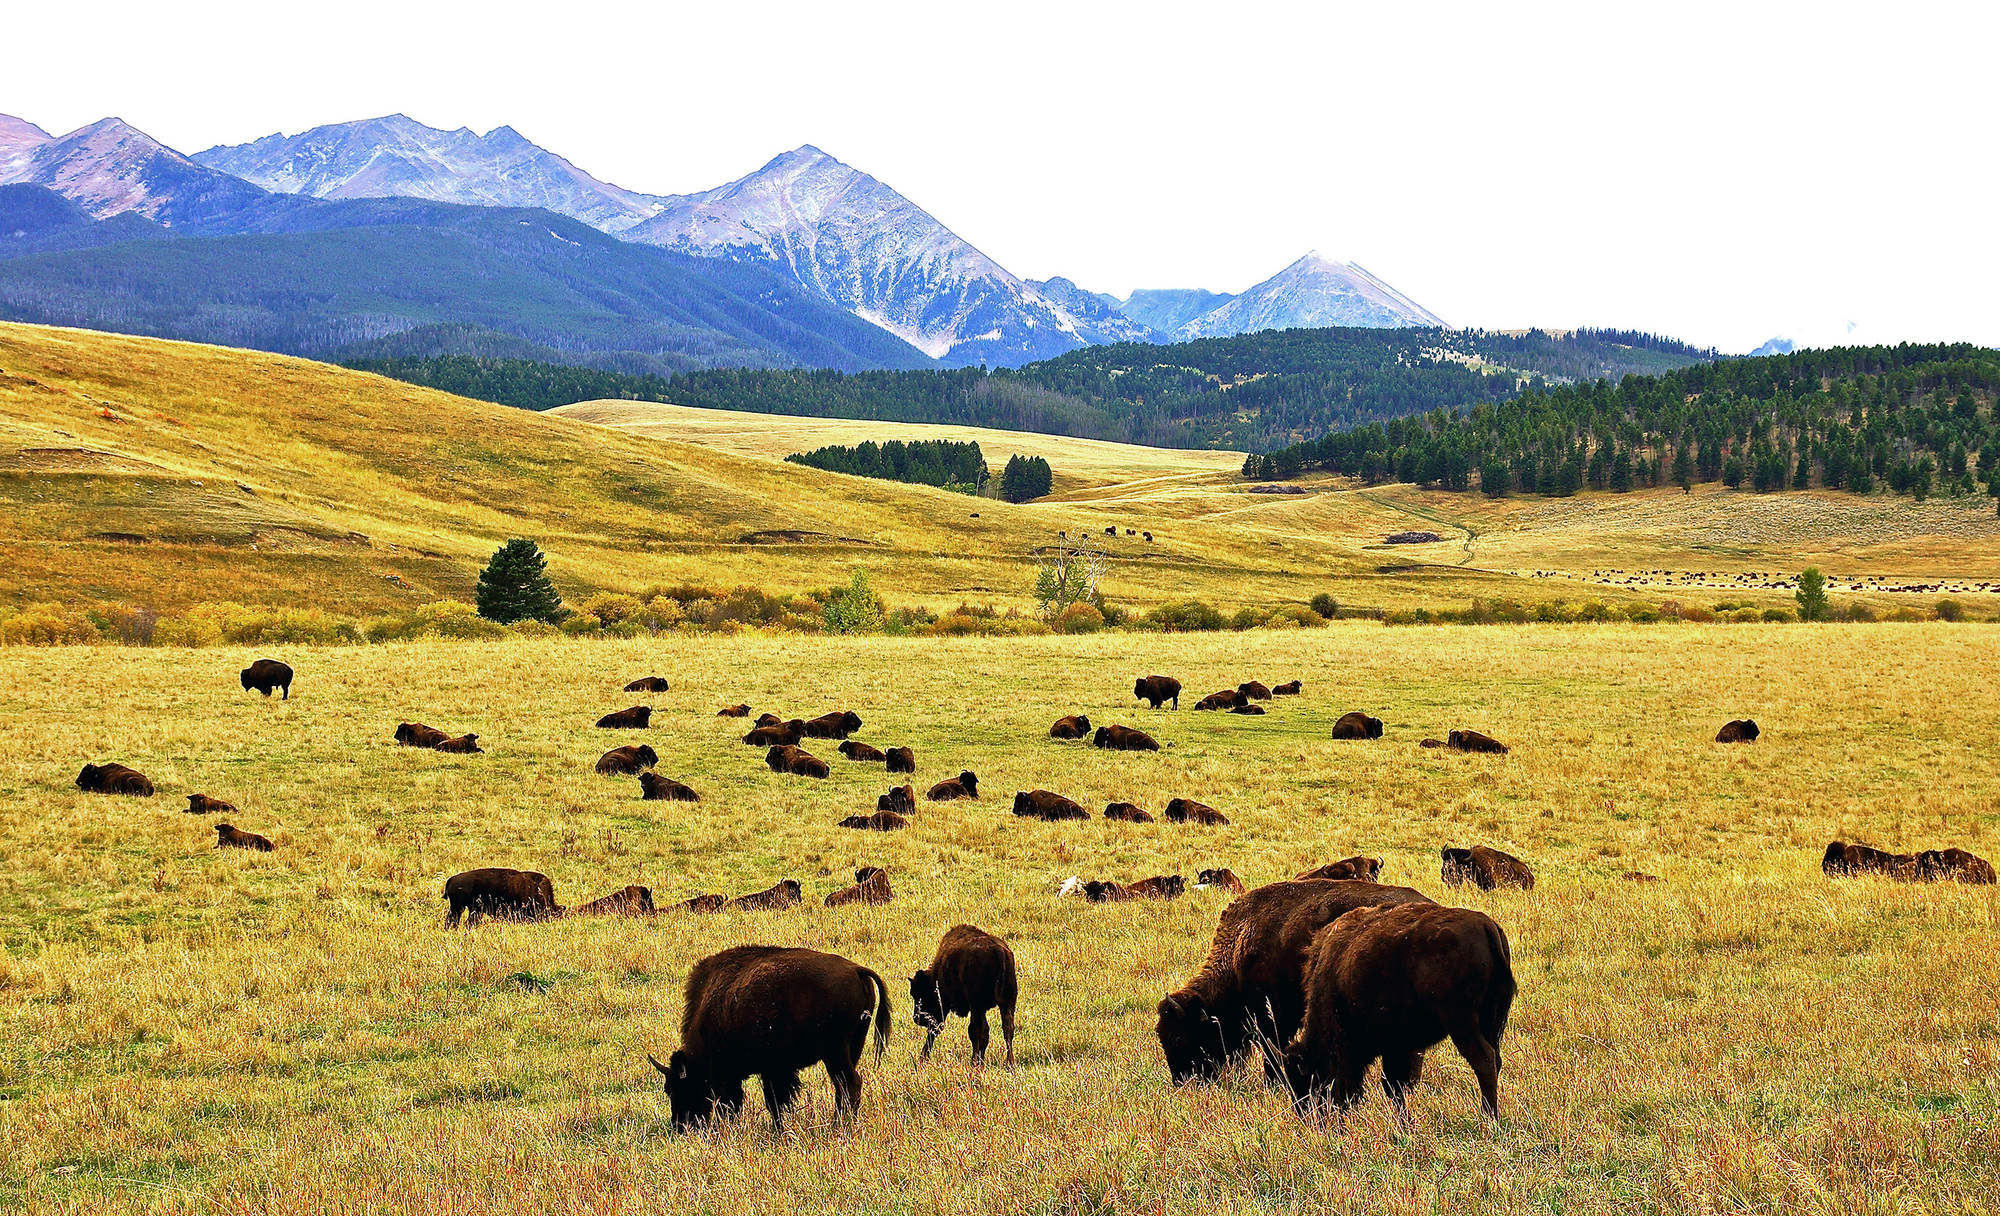 Can we save bison by eating them?